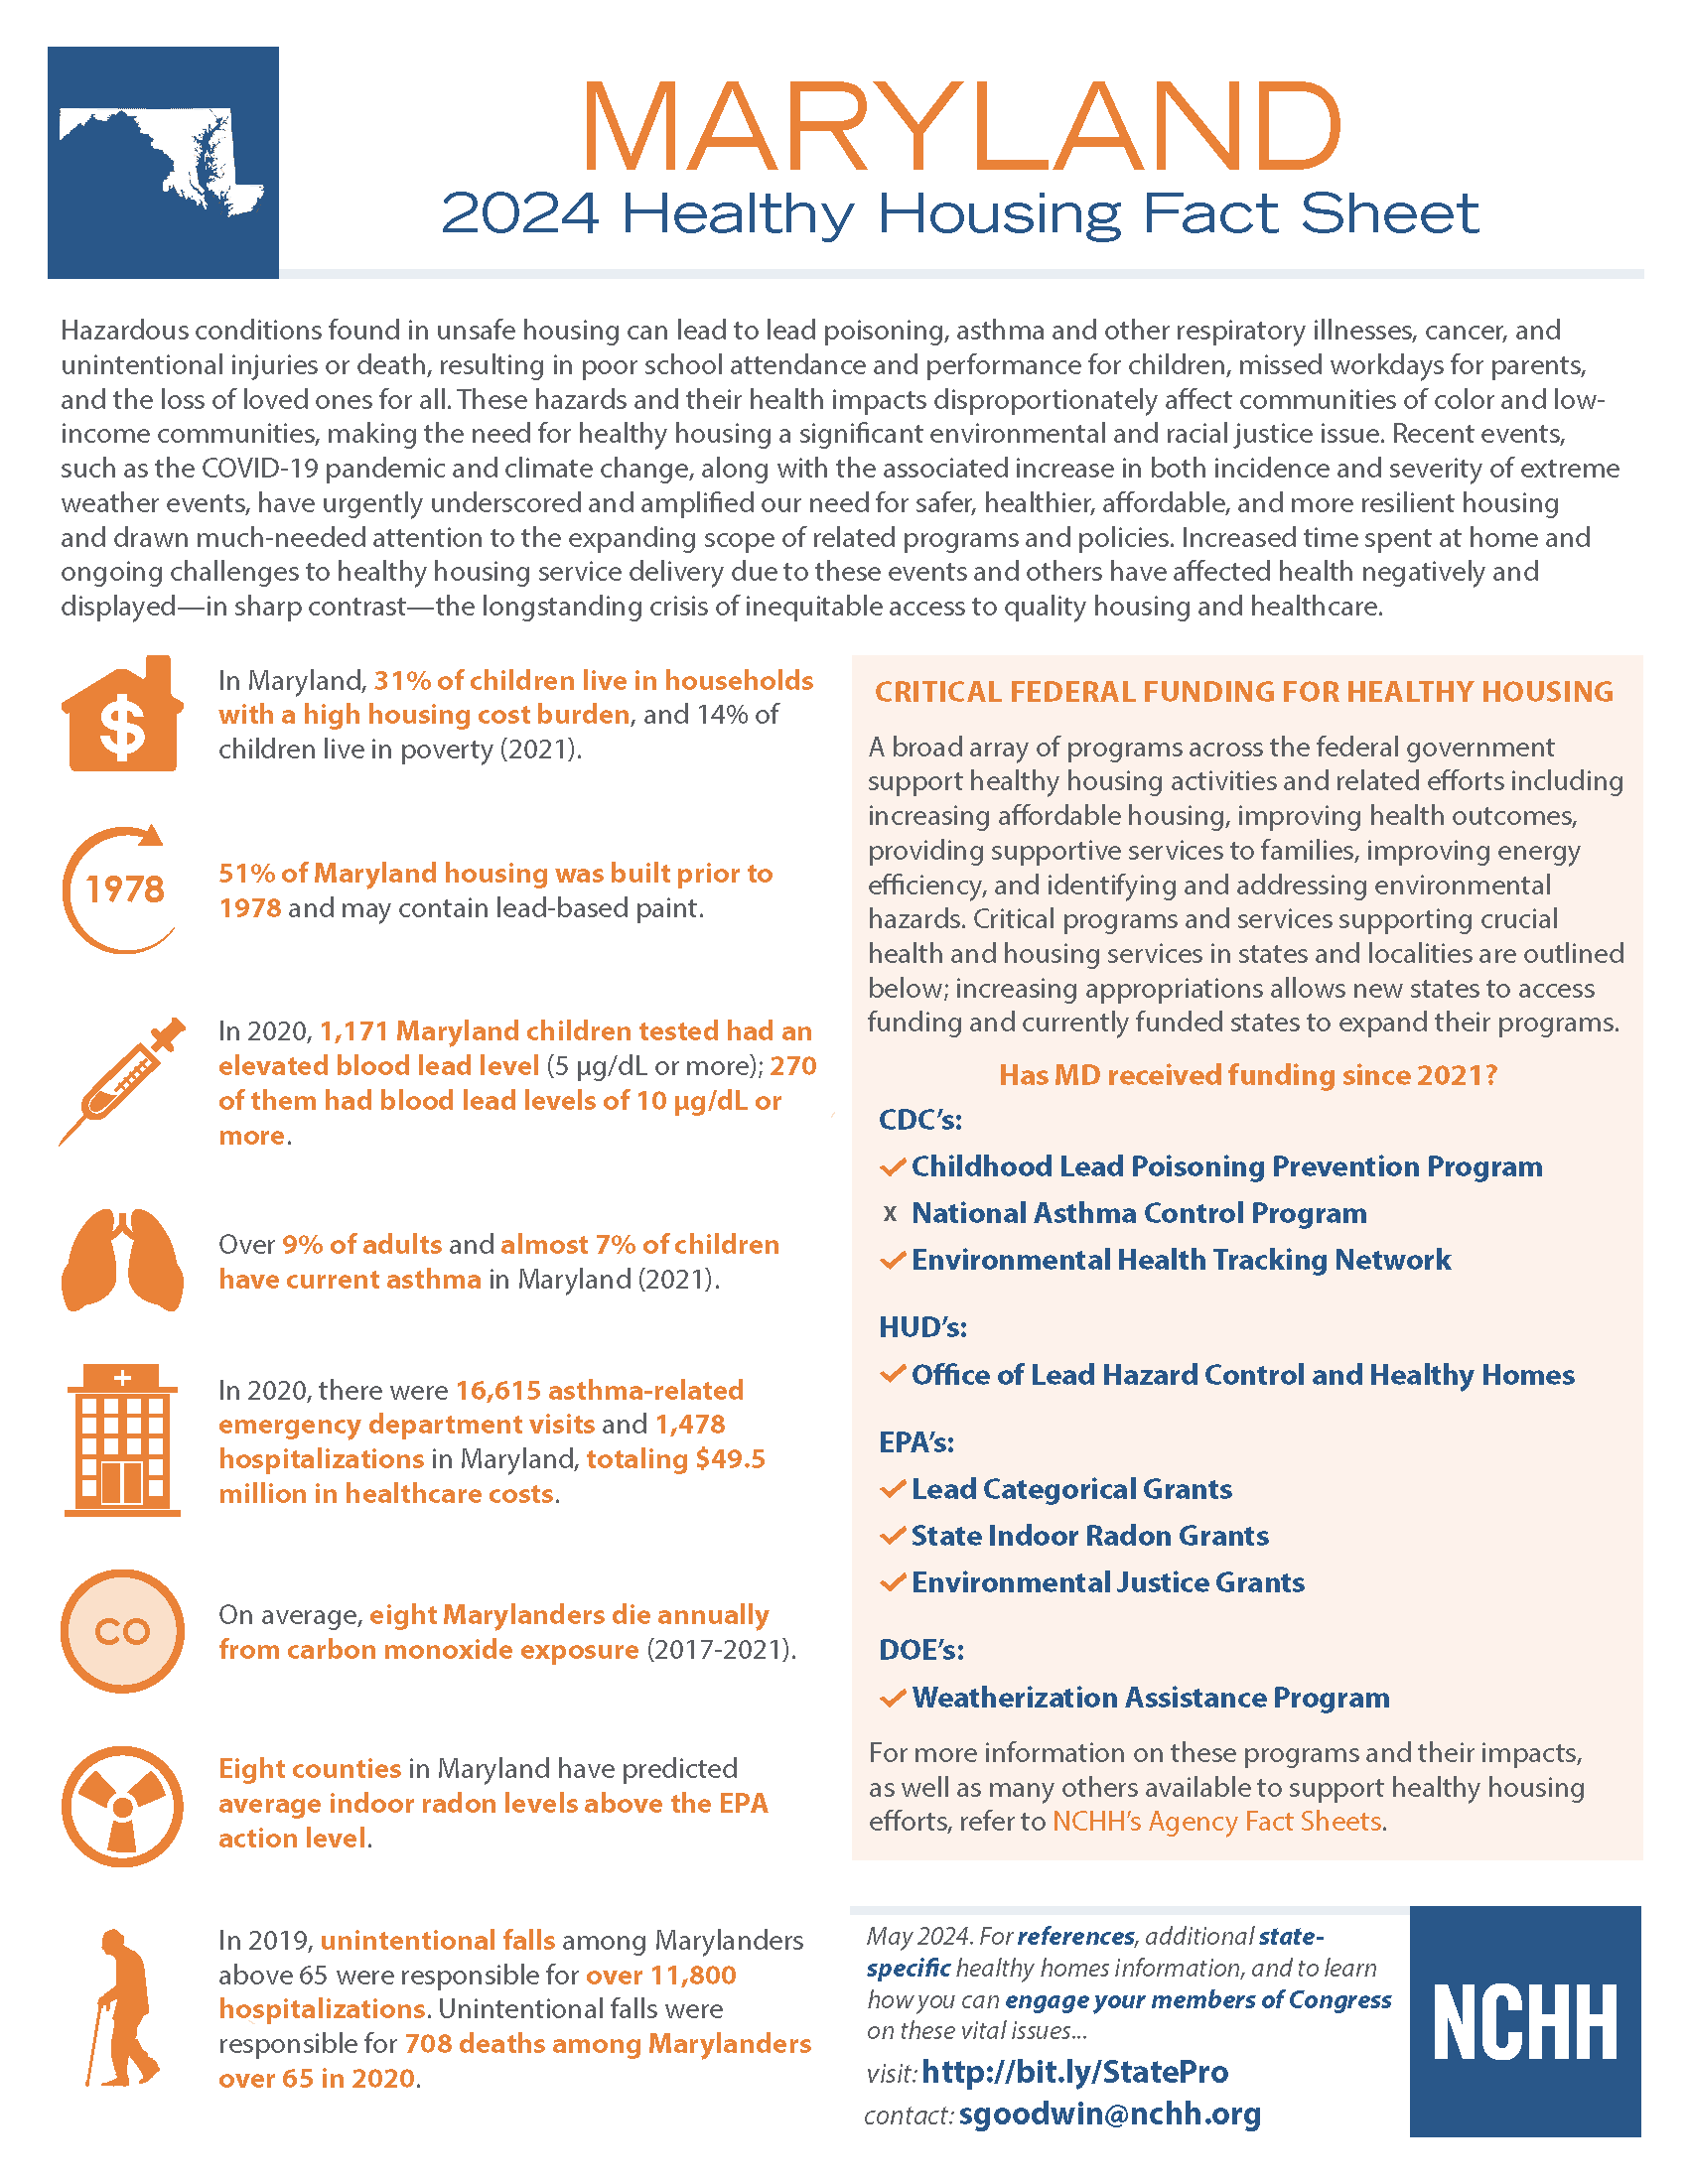 Fact sheet describing the overall environmental health of the state of Maryland.